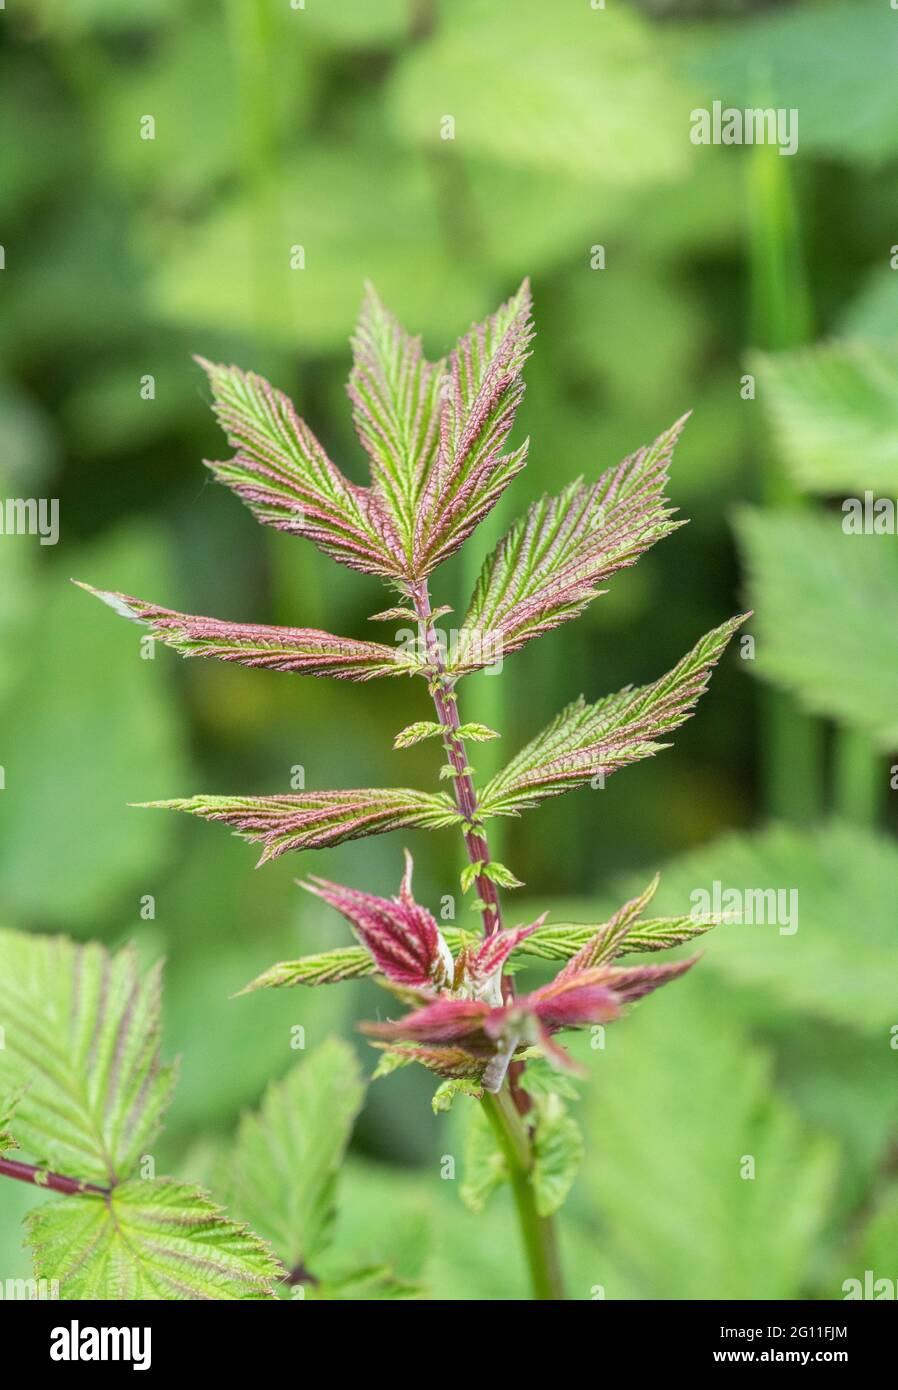 Very young, red-purple tinged, leaves of Meadowsweet / Filipendula ulmaria in roadside ditch. Once used as medicinal plant for aspirin-like content. Stock Photo